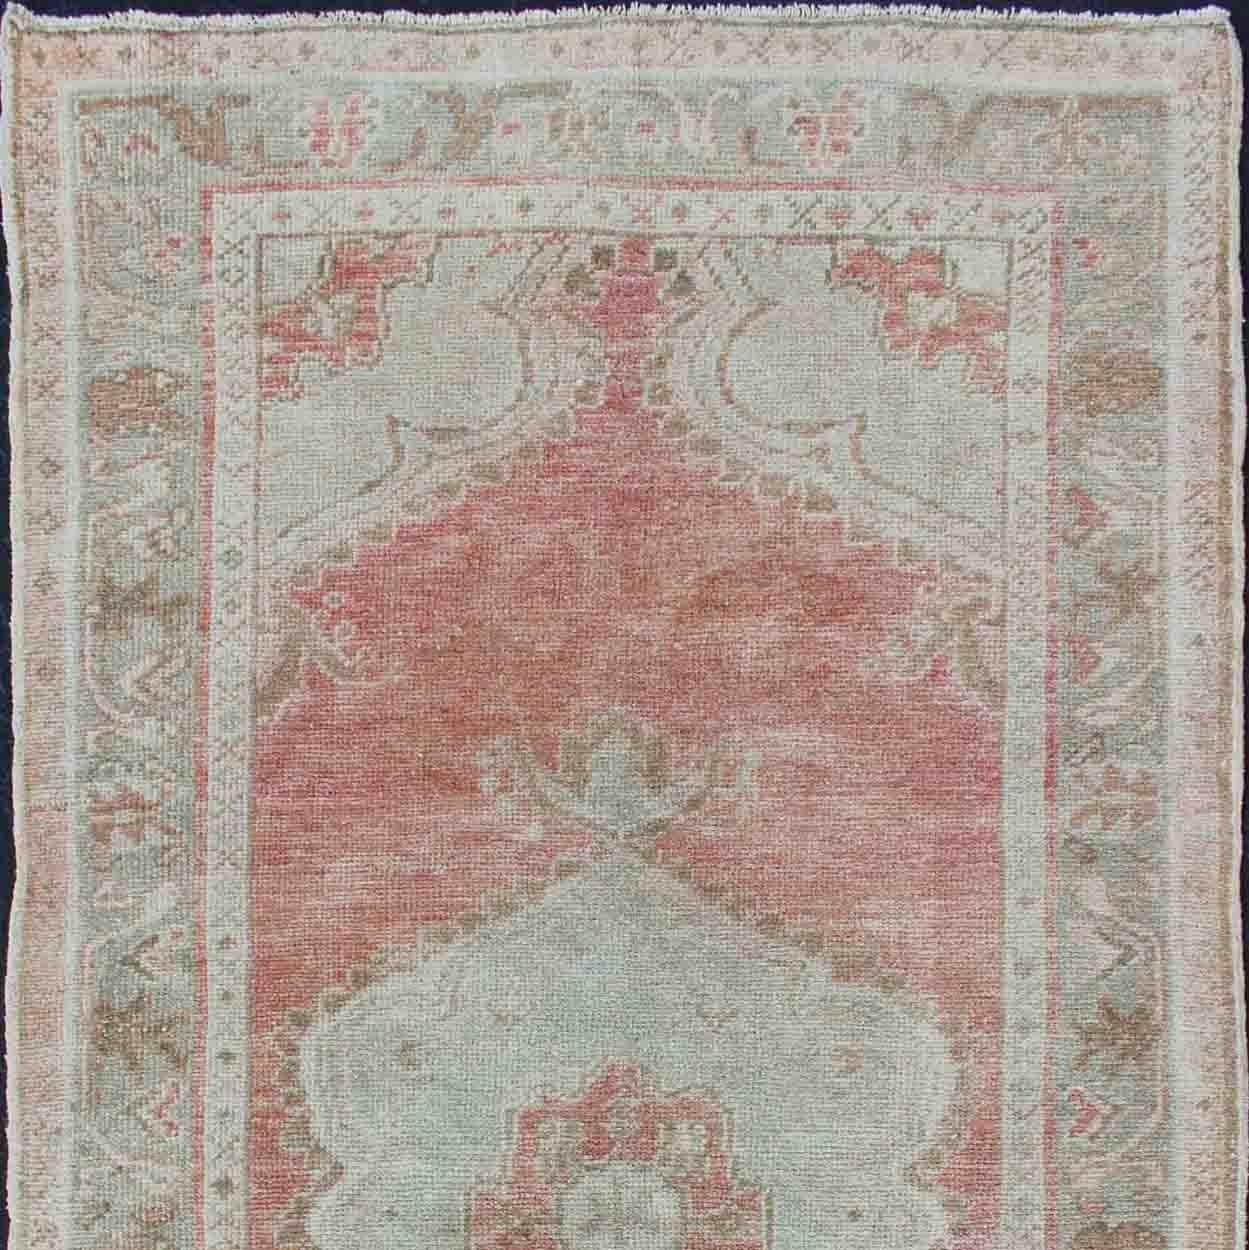 Layered floral medallion design in light blue, soft red Oushak vintage rug from Turkey, rug EN-179018, country of origin / type: Turkey / Oushak, circa 1940

This vintage Turkish Oushak carpet (circa 1940) features a central, layered, floral